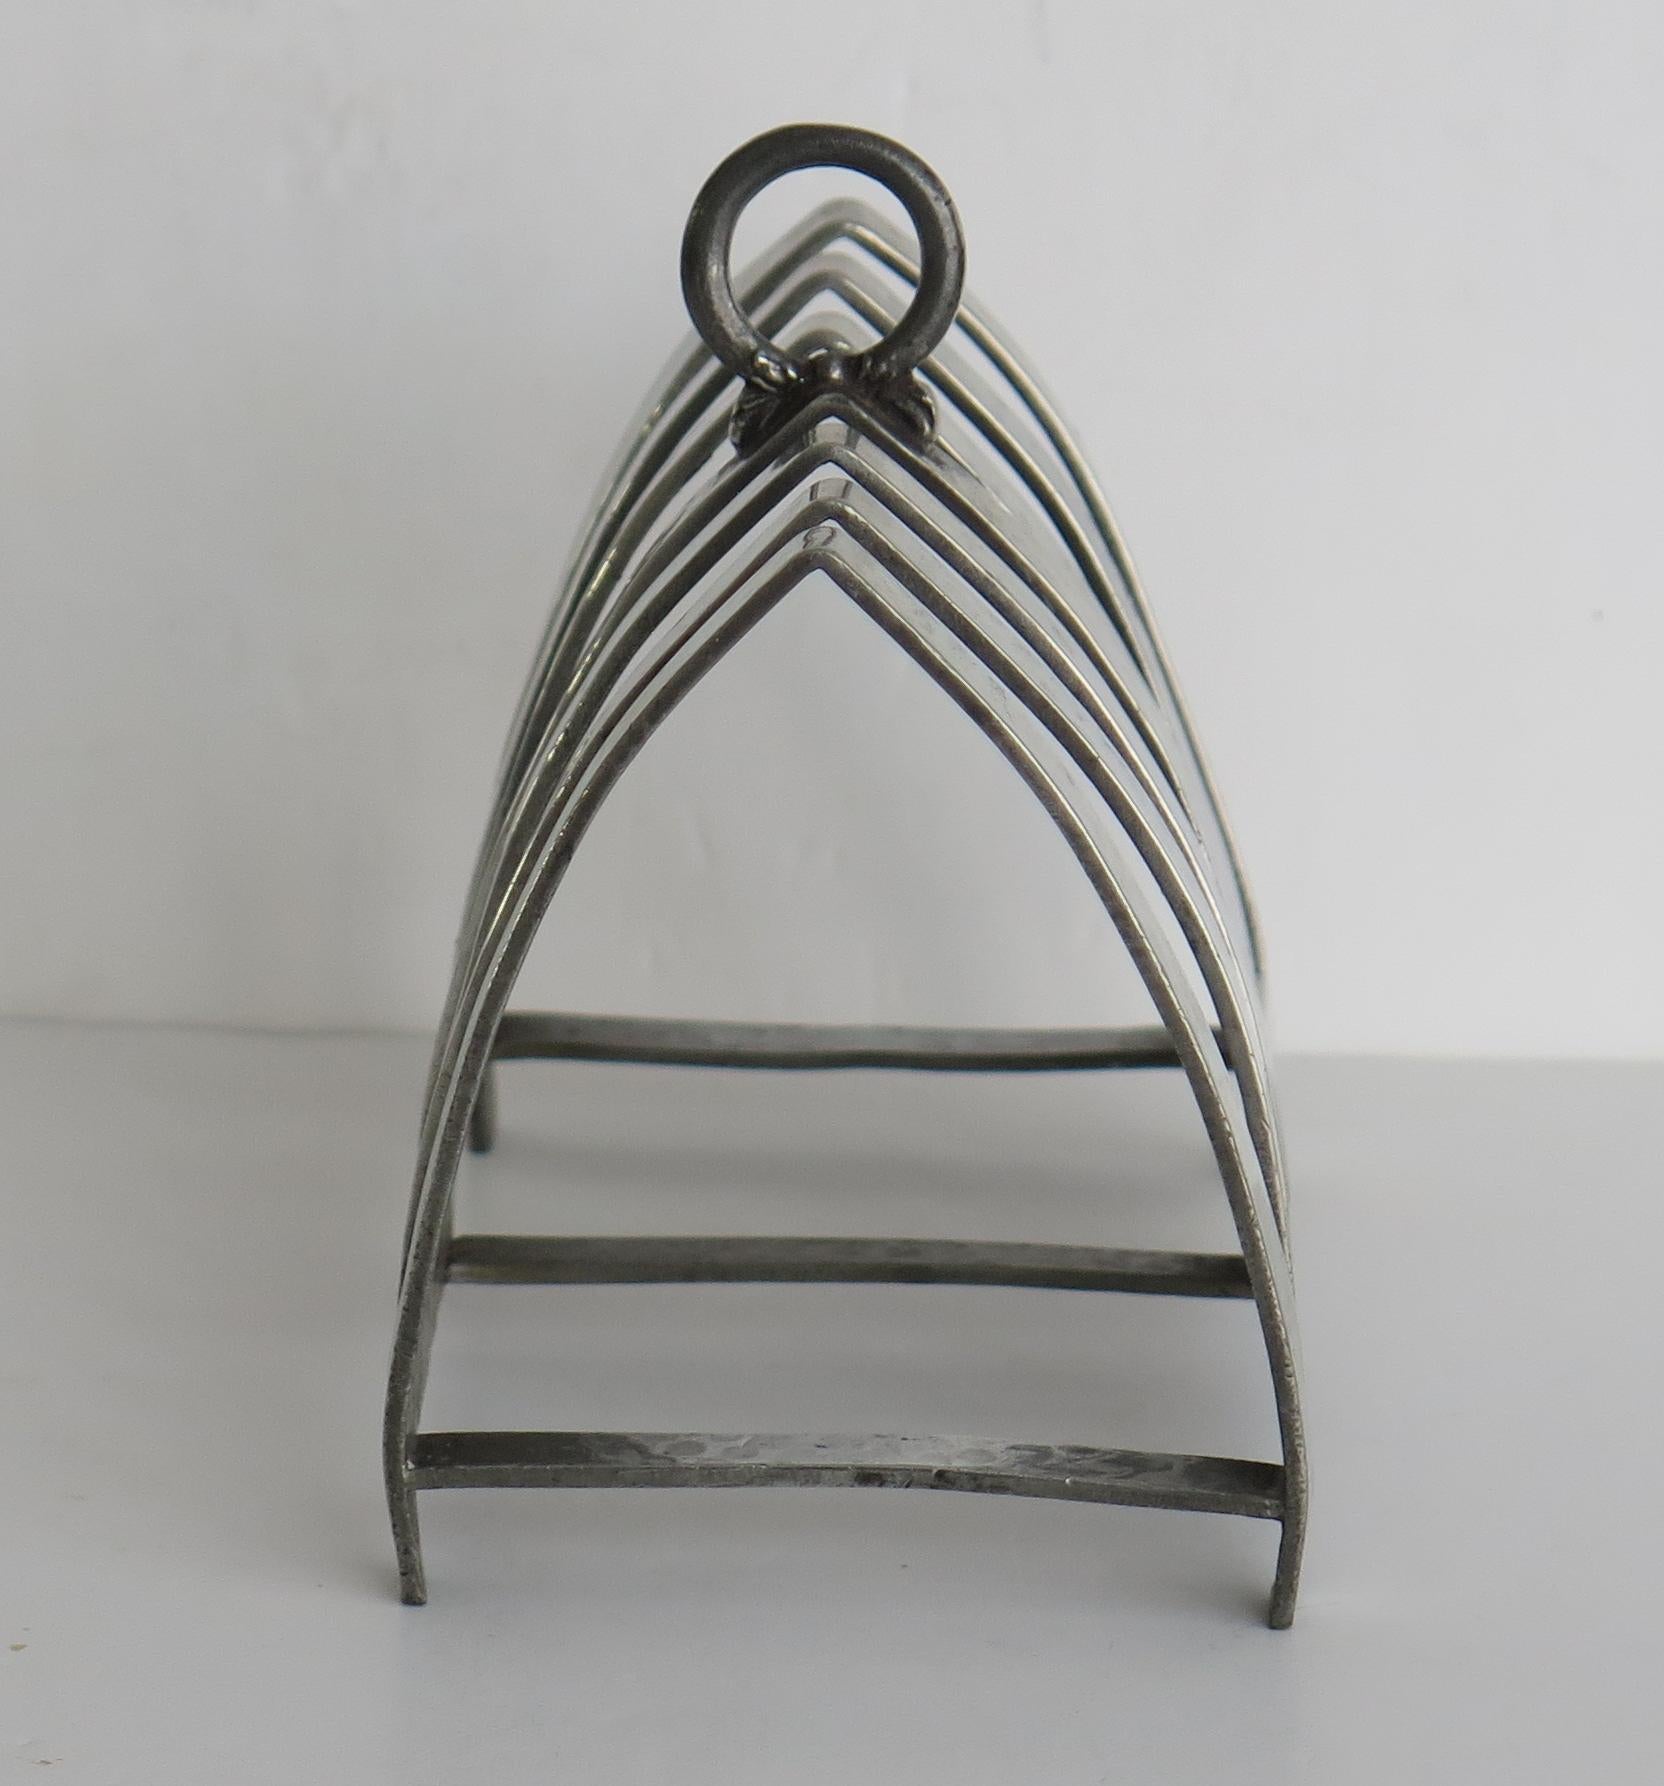 This is a good hand made, hammered pewter Letter or Toast rack made by Connells of 88 Cheapside, London, during the Art Deco period, Circa 1925

The shape is very 